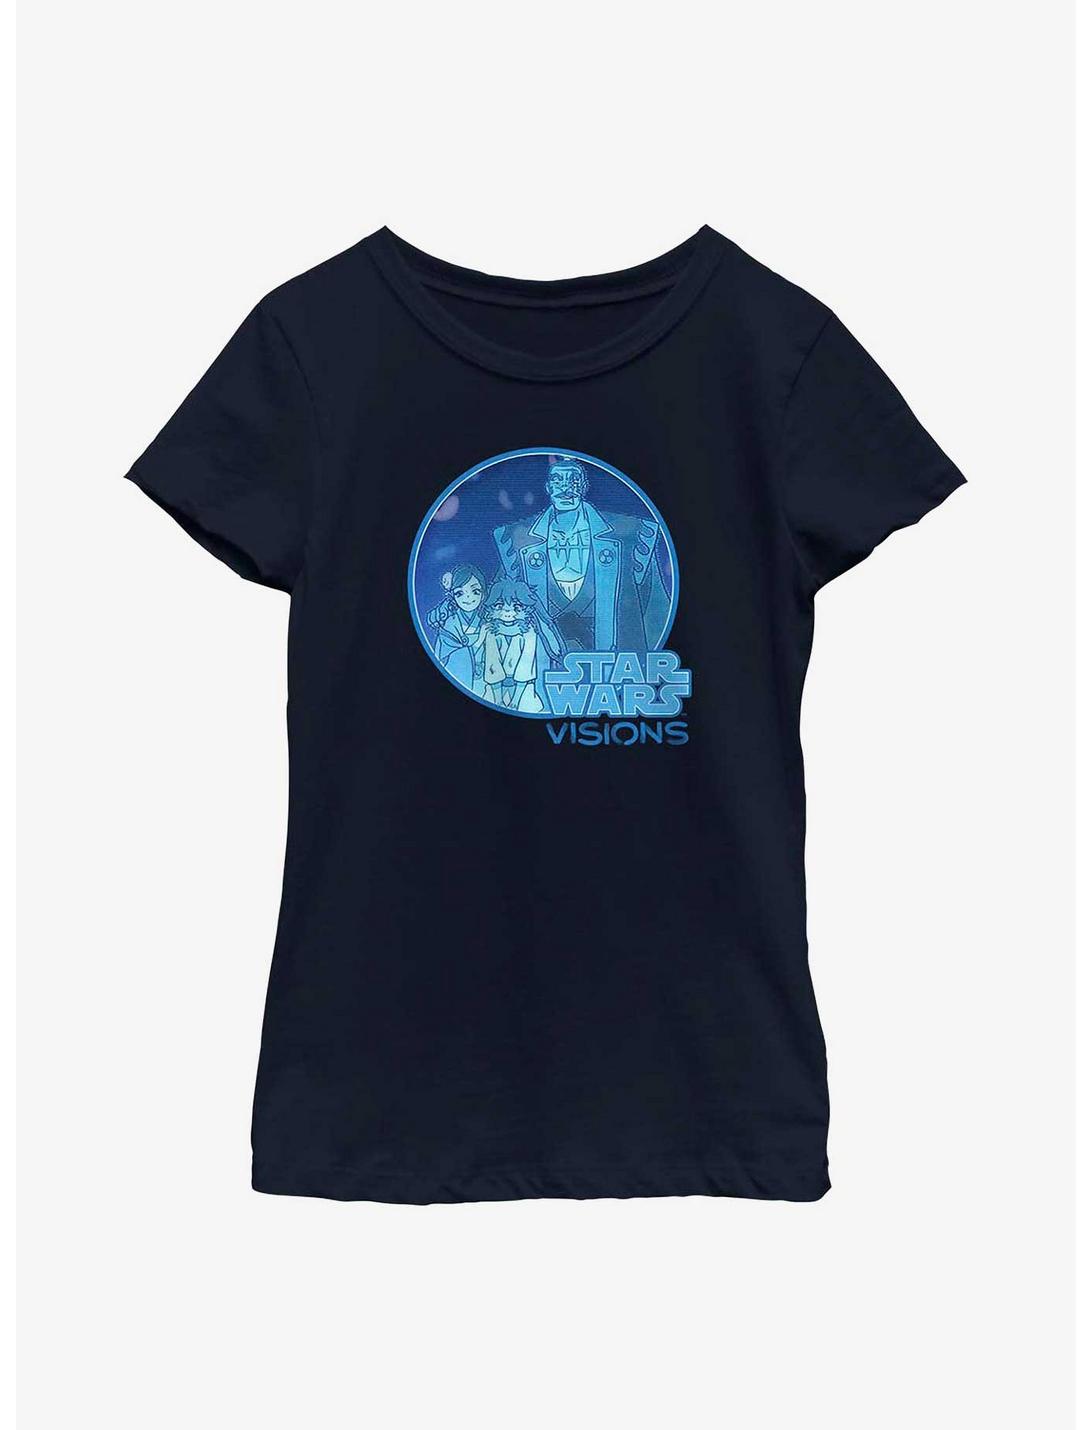 Star Wars: Visions Once A Family Youth Girls T-Shirt, NAVY, hi-res